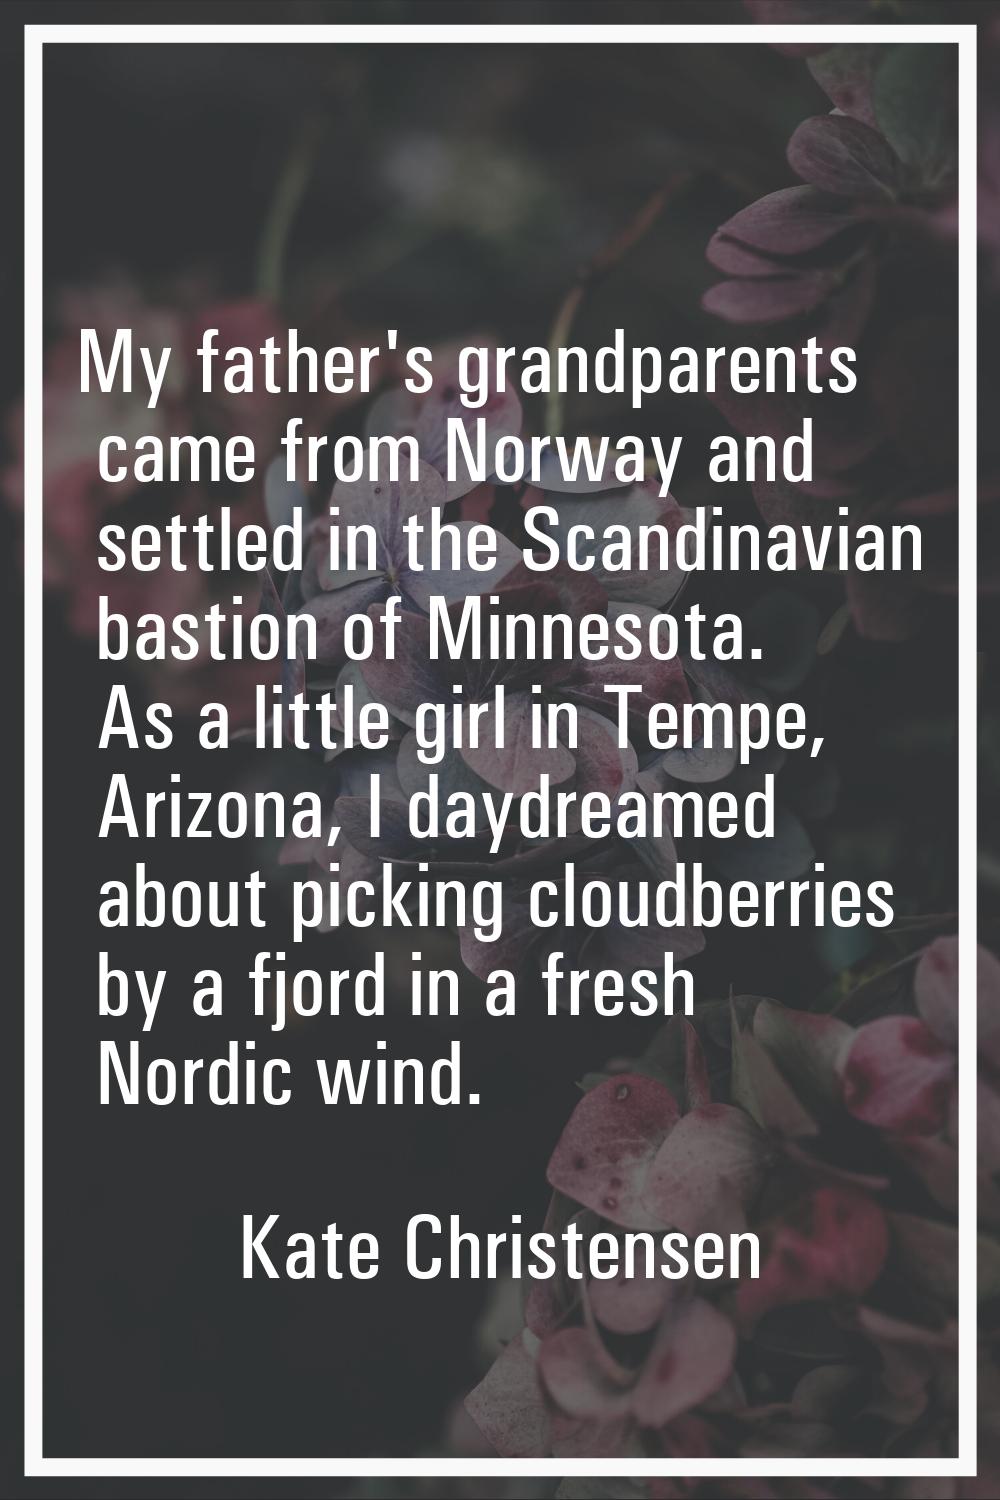 My father's grandparents came from Norway and settled in the Scandinavian bastion of Minnesota. As 